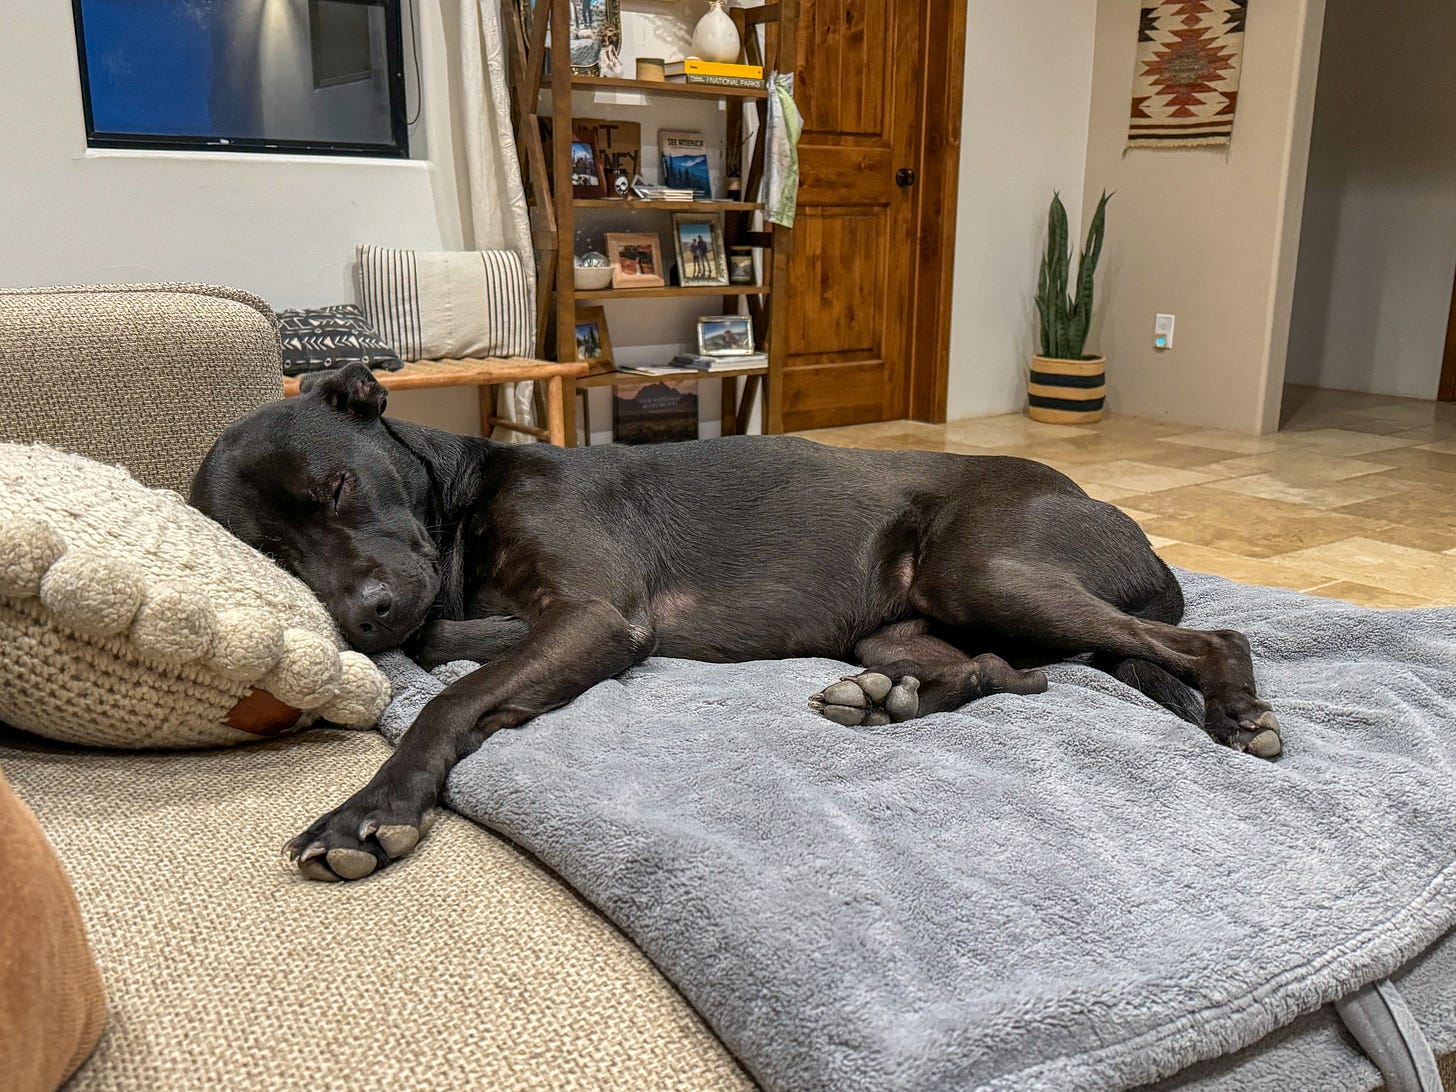 A black dog naps with her head on a round white pillow while on the couch. She is sleeping on a gray blanket.